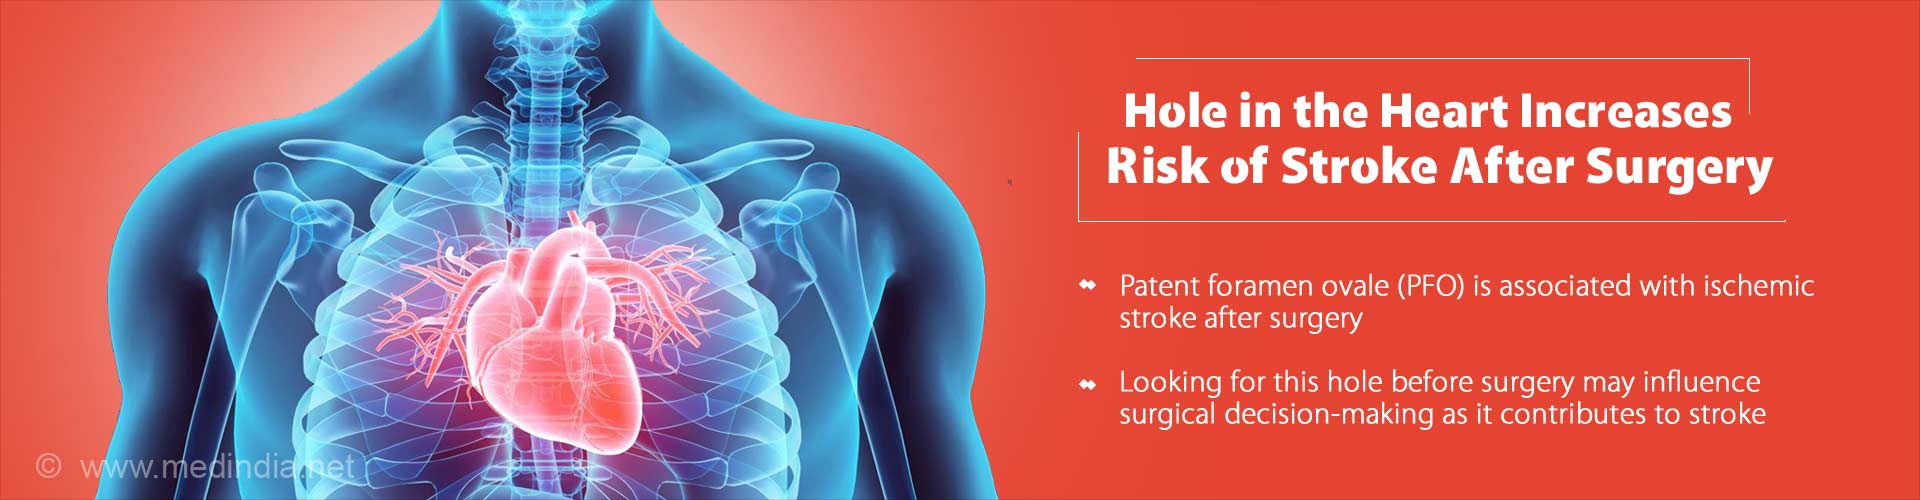 hole in the heart increases risk of stroke after surgery
- patent foramen ovale (PFO) is associated with ischemic stroke after surgery
- looking for this hole before surgery may influence surgical decision-making as it contributes to stroke